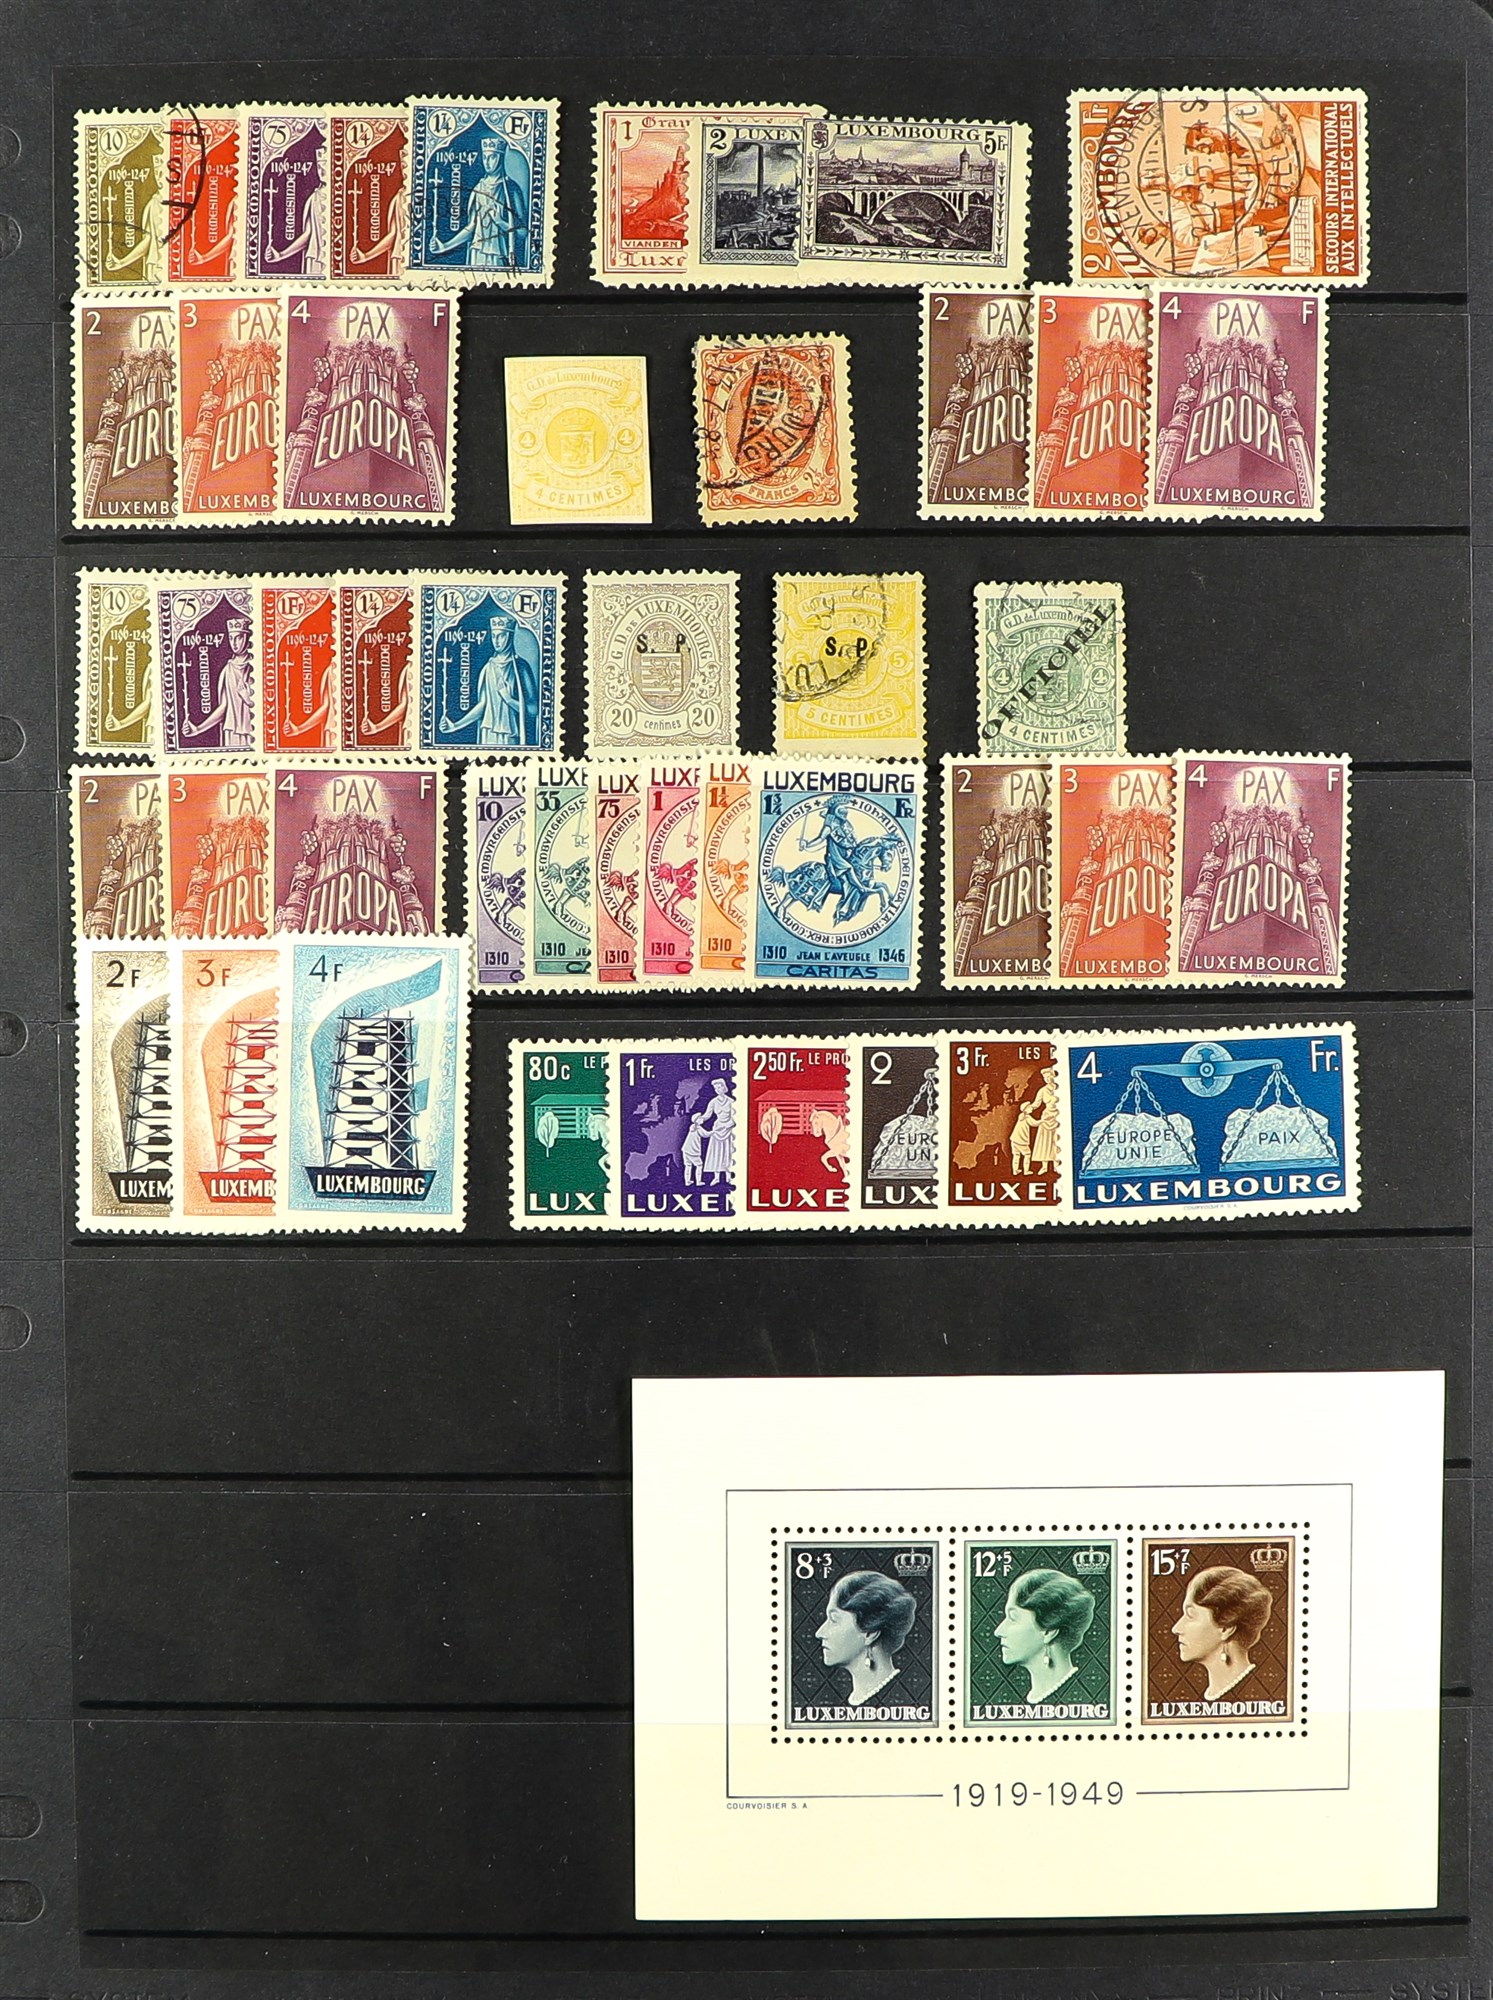 LUXEMBOURG 1859 - 1957 small group of mint, never hinged mint & used stamps group, includes 1859-